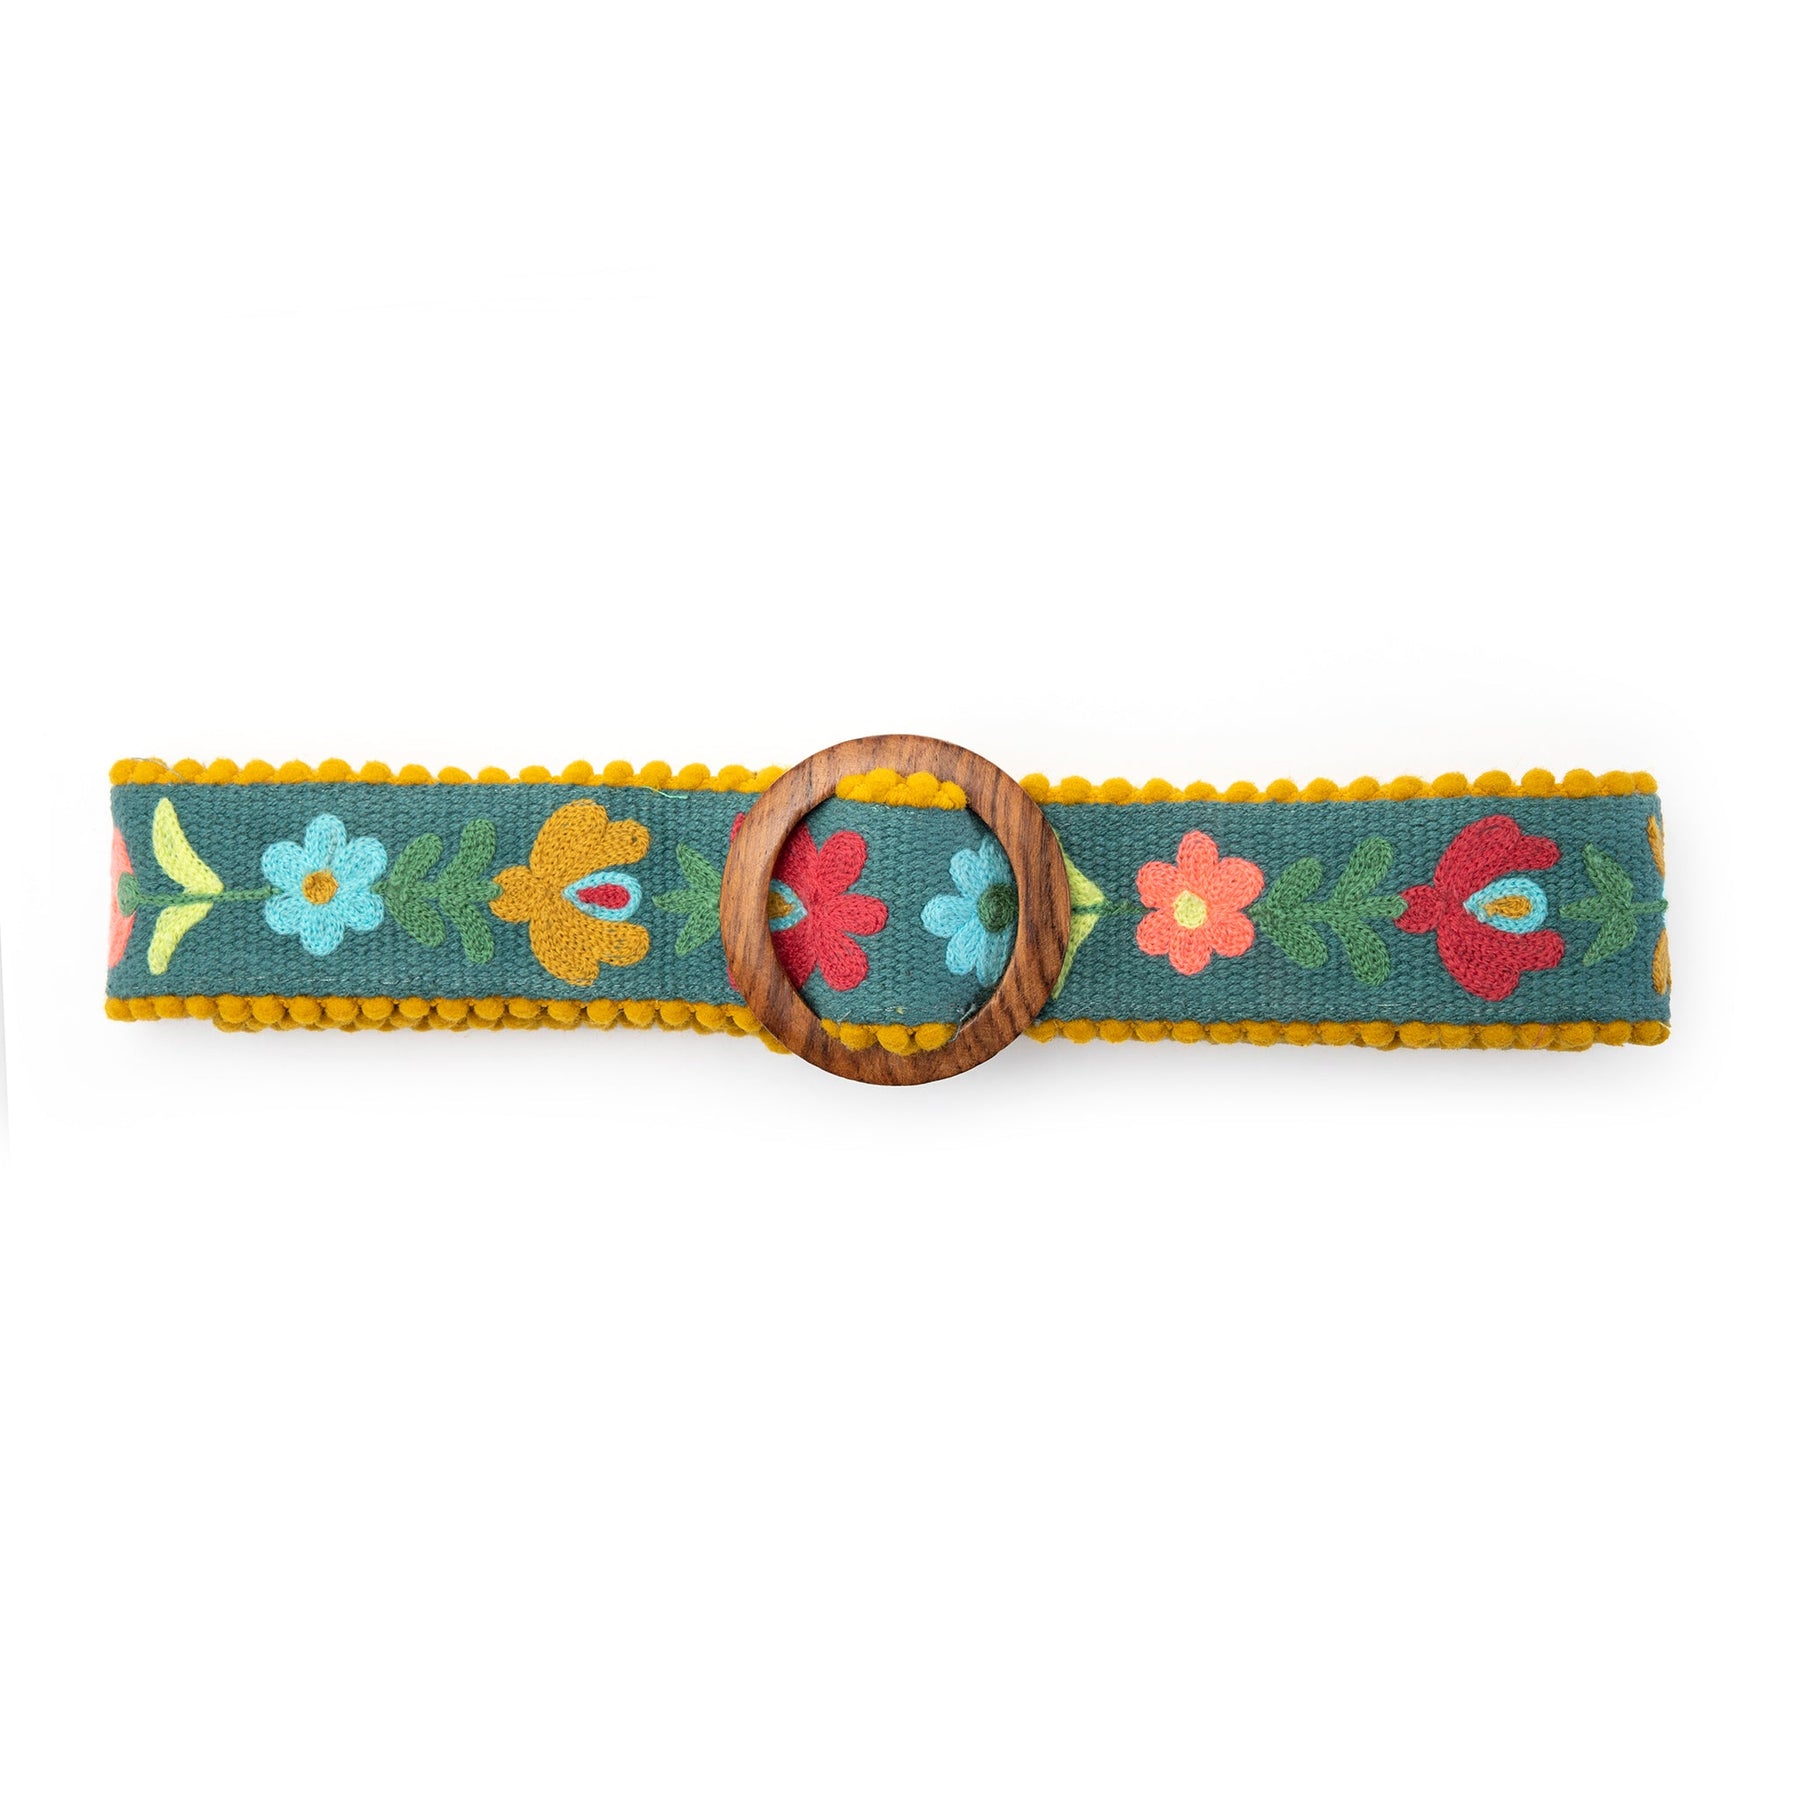 Embroidered Cotton Belt-Bright Floral